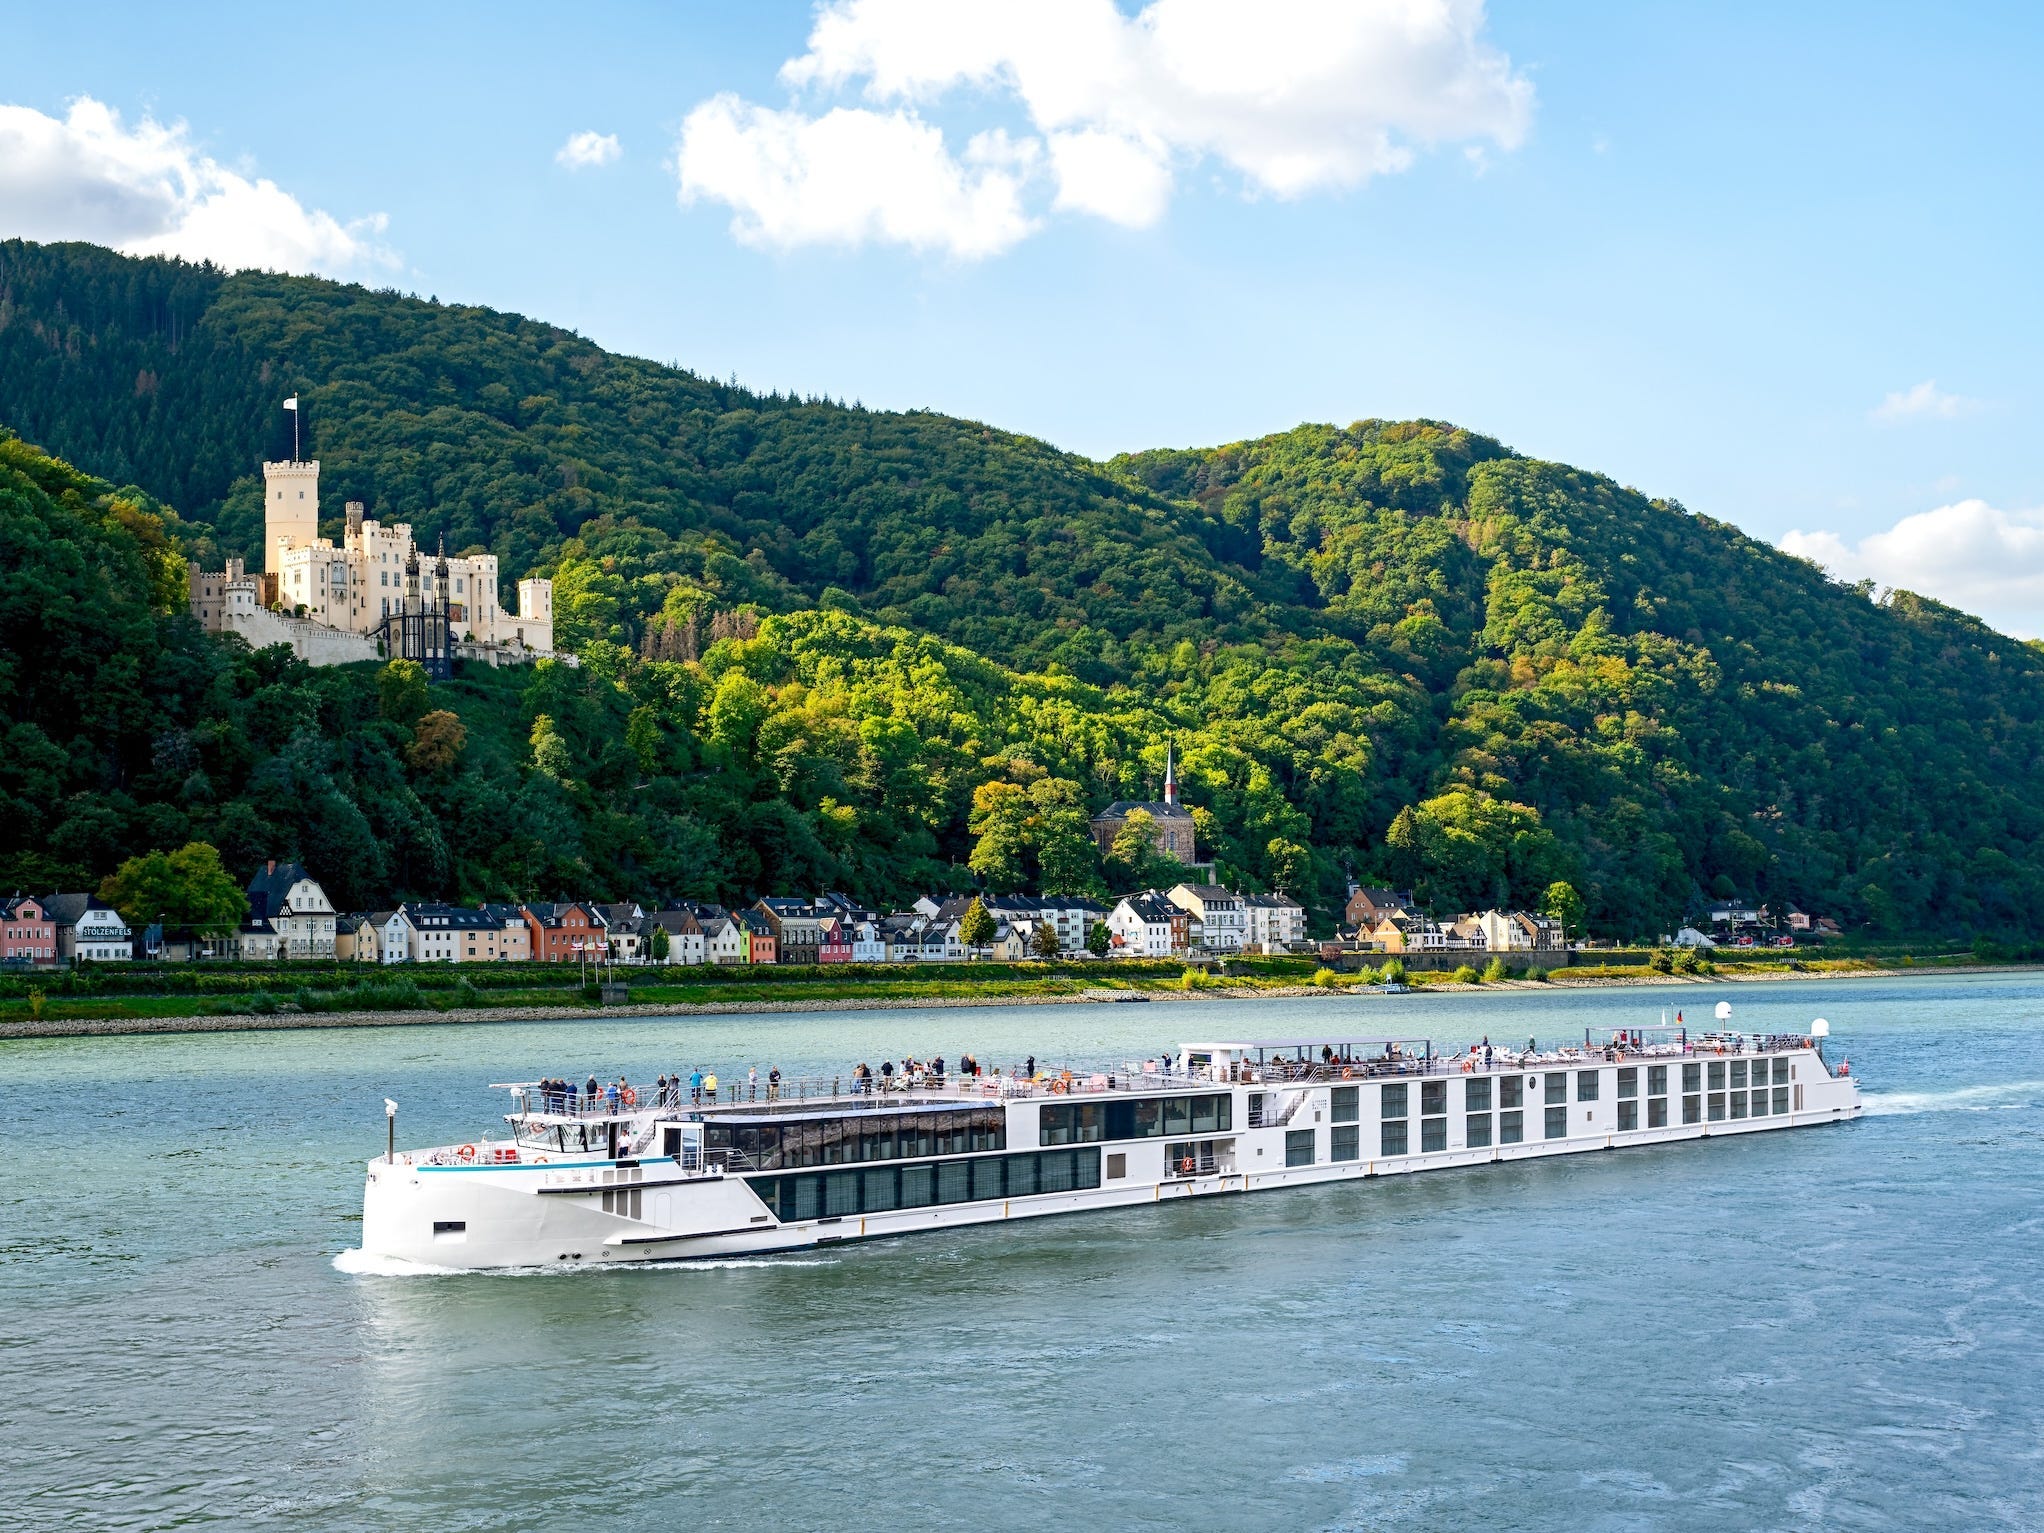 <ul class="summary-list"><li>Newcomer Riverside Luxury Cruises wants to break into the growing river cruise market.</li><li>The <a href="https://www.businessinsider.com/new-luxury-cruise-ship-wealthy-travelers-regent-seven-seas-grandeur-2023-12">ultra-luxury cruise line</a> operates former Crystal ships in popular European rivers like the Danube.</li><li>Riverside's 2024 cruises start at $1,055 per person for four days.</li></ul><p>A new <a href="https://www.businessinsider.com/review-ultra-luxury-cruise-wealthy-travelers-regent-seven-seas-2023-12">ultra-luxury cruise line</a> wants to be the swankiest travel-by-river vacation option.</p><p>To do so, it's enticing cruisers with truffle-infused butter, $320-per-person dinners, and butlers that can be beckoned with a simple WhatsApp message.</p><p><a href="https://www.businessinsider.com/ultra-luxury-cruise-stateroom-not-favorite-regent-seven-seas-review-2023-12">Affluent travelers</a>, meet Riverside Luxury Cruises.</p><p>The budding company first set sail in March 2023. With a year of service under its belt, its three ships are now sailing some of Europe's most popular rivers — starting at more than $260 per person per day.</p><div class="read-original">Read the original article on <a href="https://www.businessinsider.com/riverside-new-ultra-luxury-european-river-cruise-company-2024-4">Business Insider</a></div>